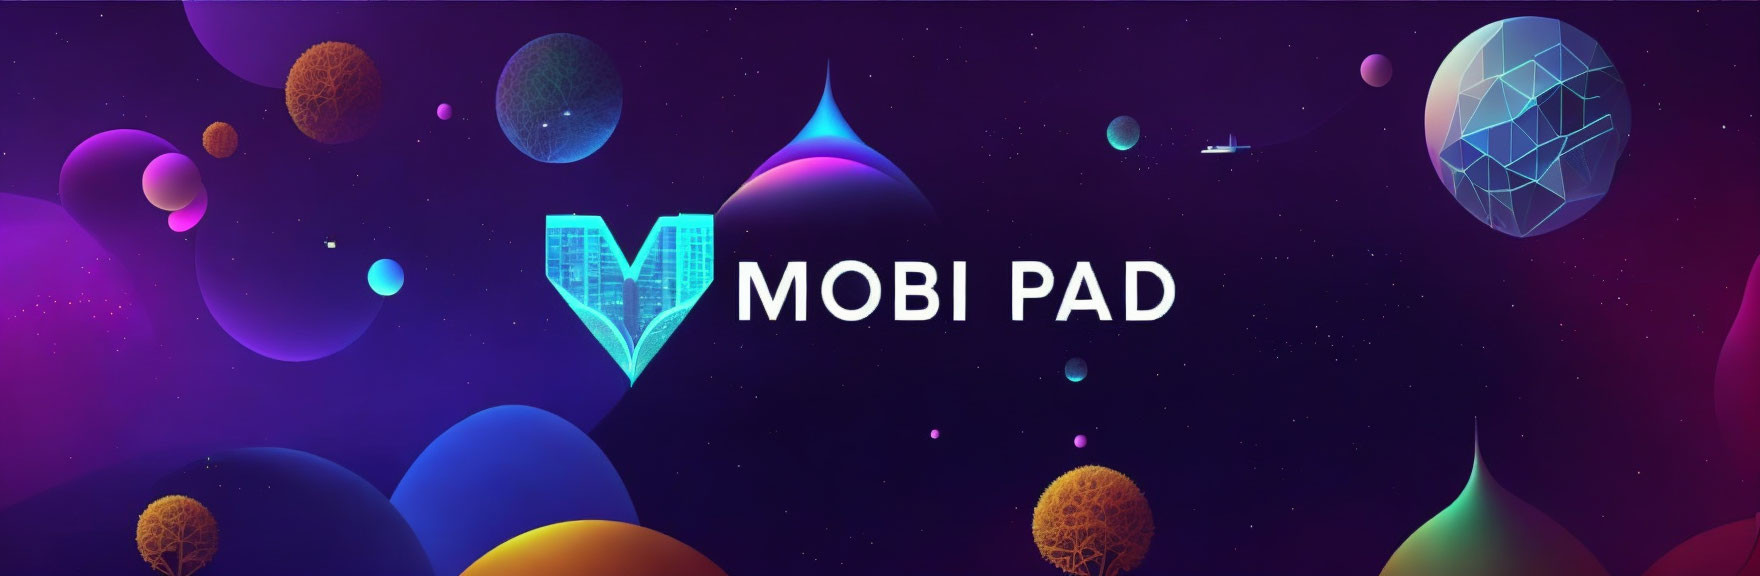 Colorful digital artwork with "MOBI PAD" text, stylized planets, trees, spaceship,